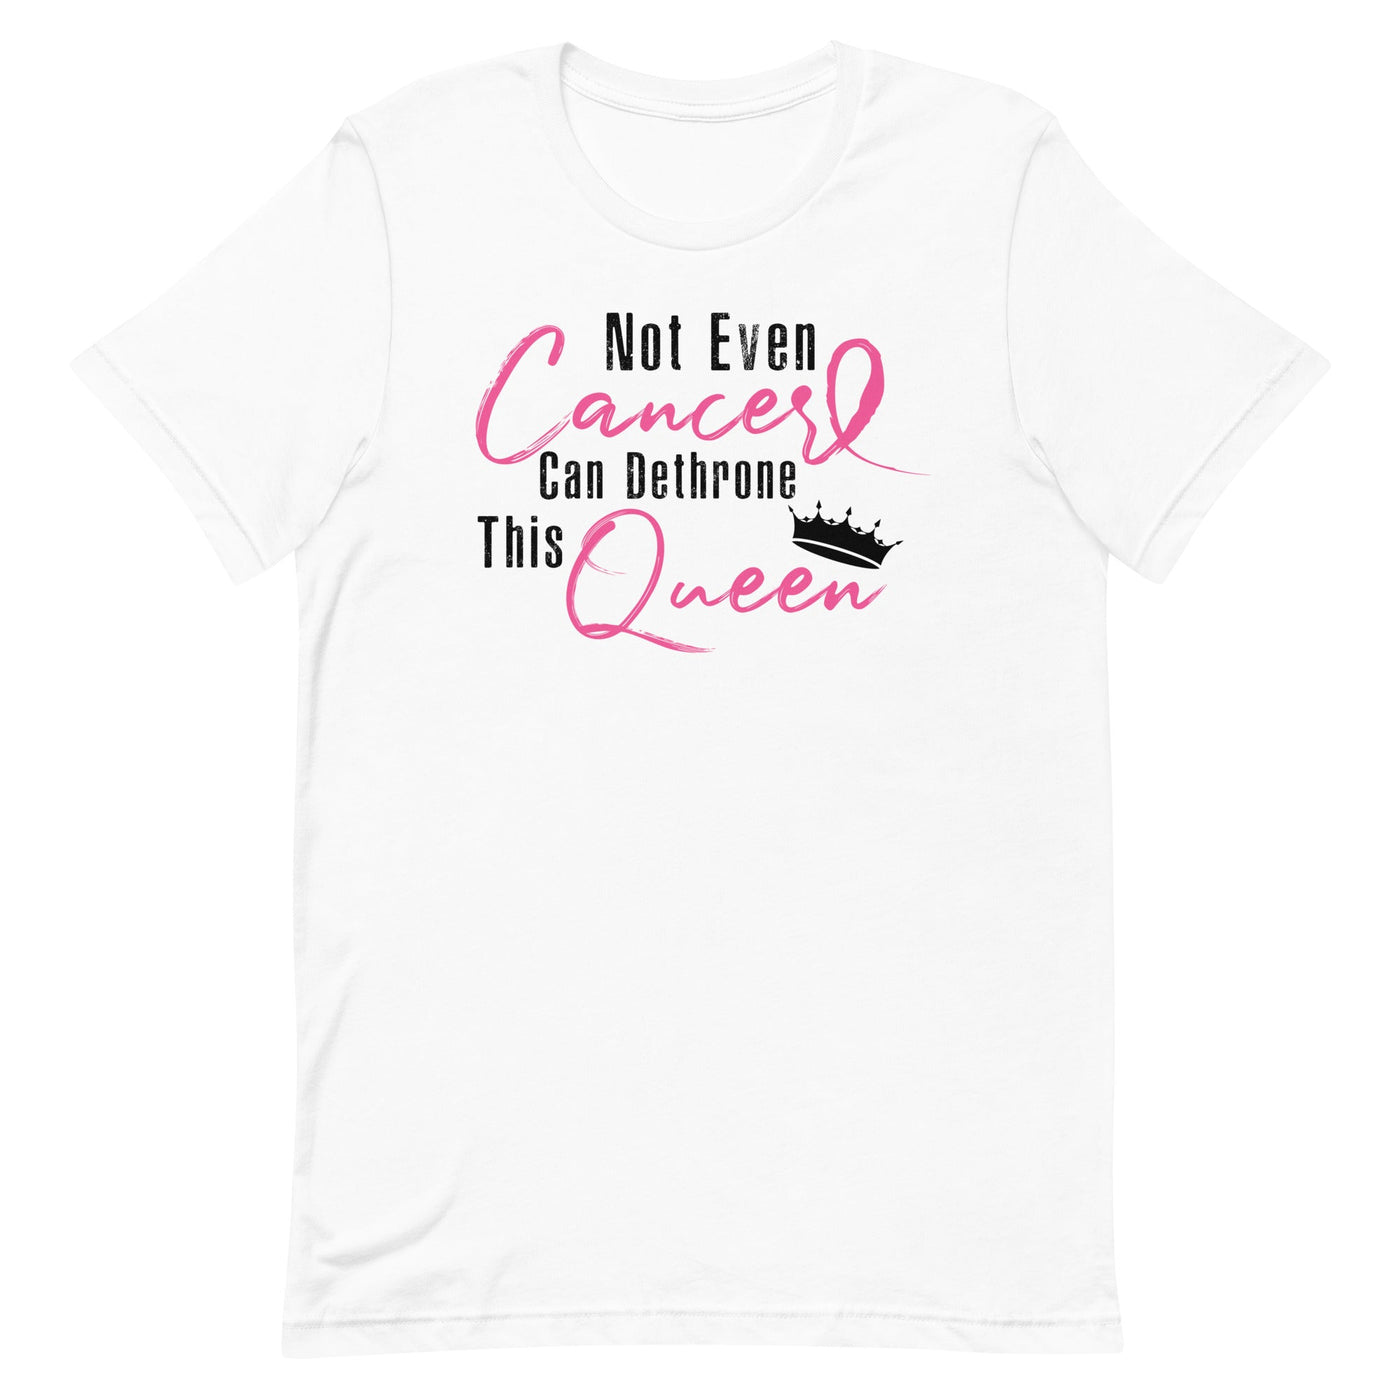 NOT EVEN CANCER CAN DETHRONE THIS QUEEN WOMEN'S T-SHIRT- BLACK AND PINK FONT White S 